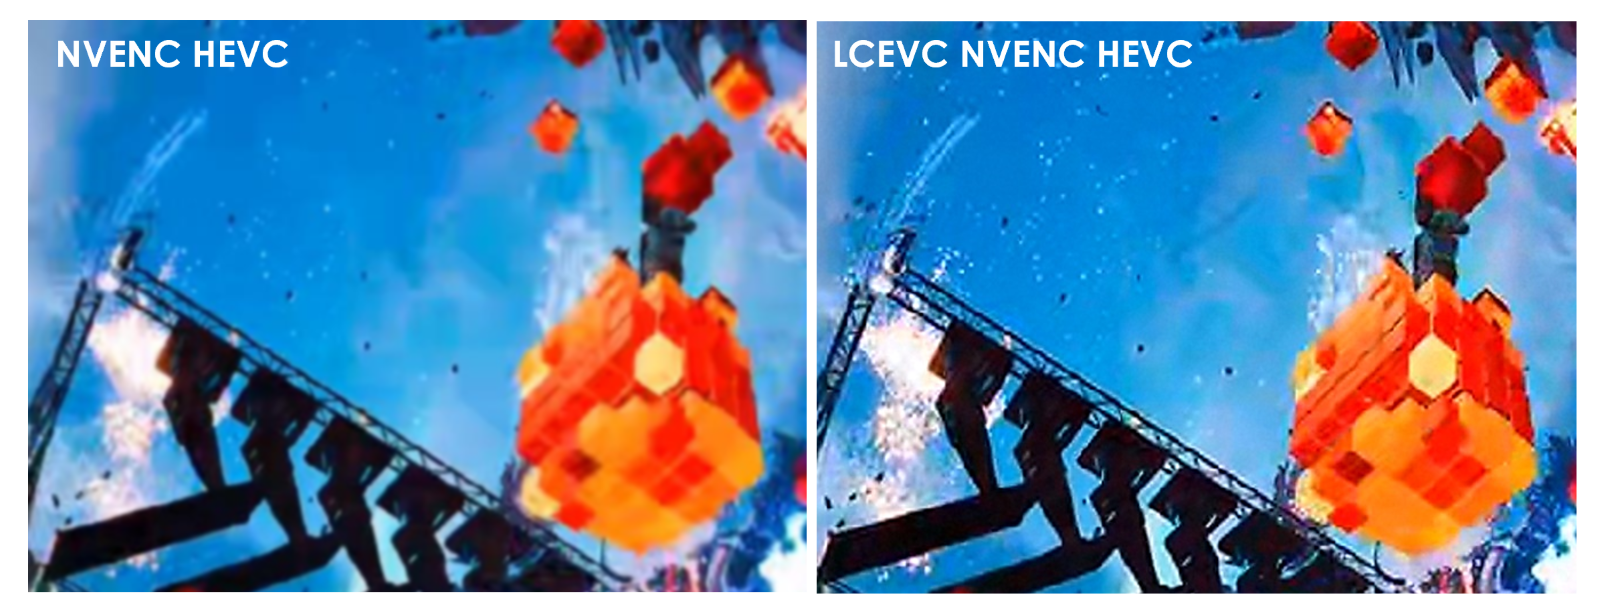 Two versions of the same image with HEVC compared to LCEVC enhanced HEVC at 25 Mbit/s. 